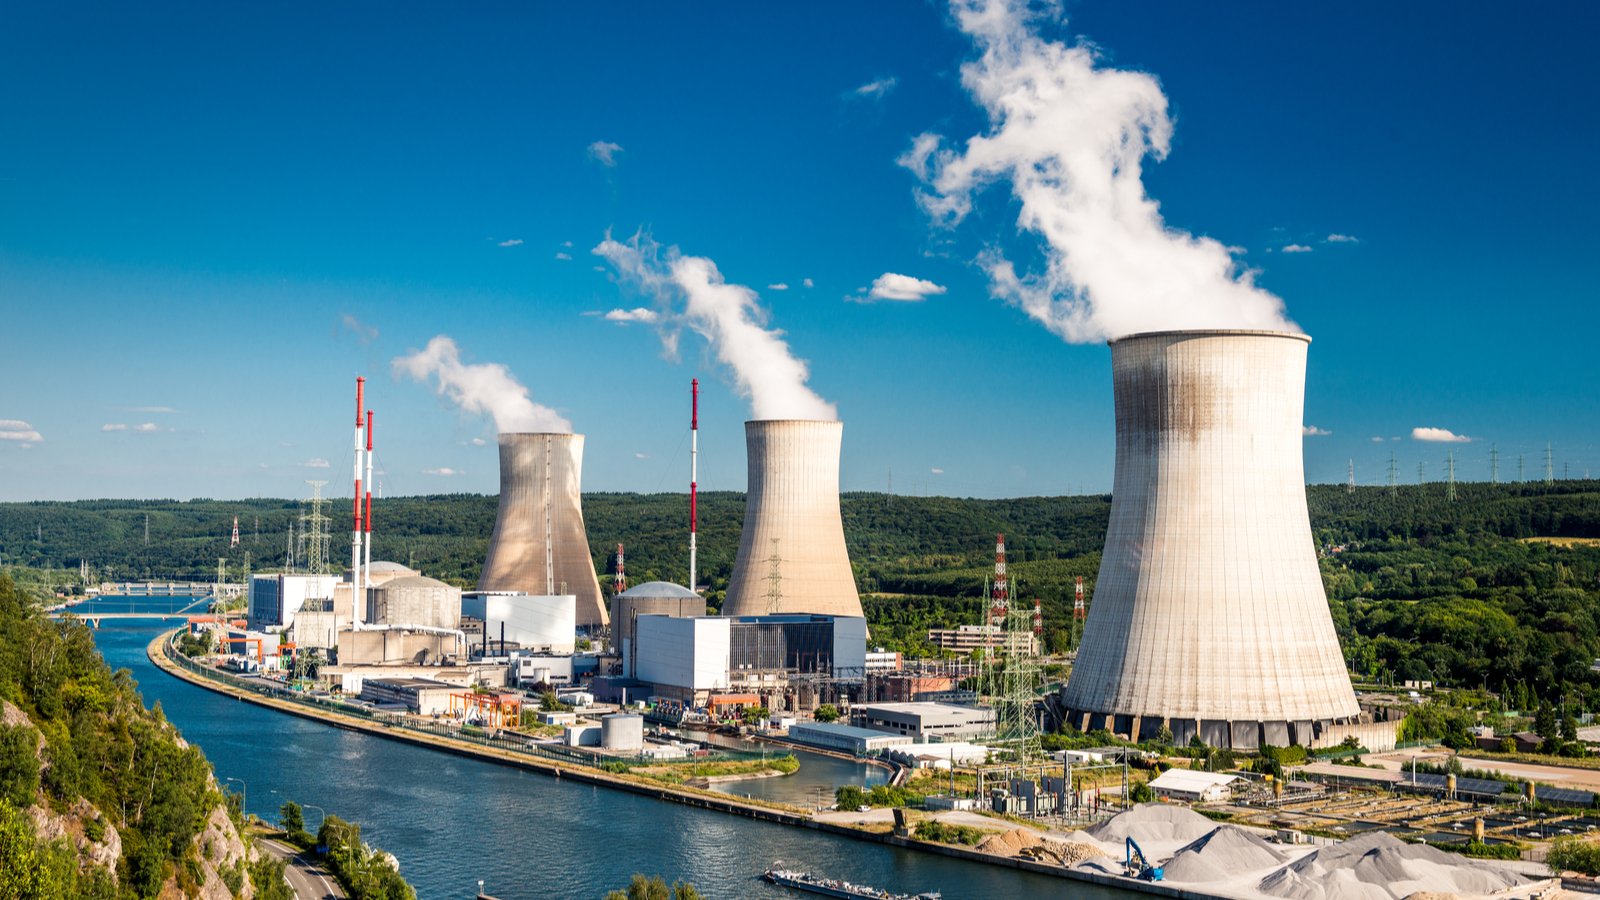 CCJ Stock: a nuclear power plant in Belgium